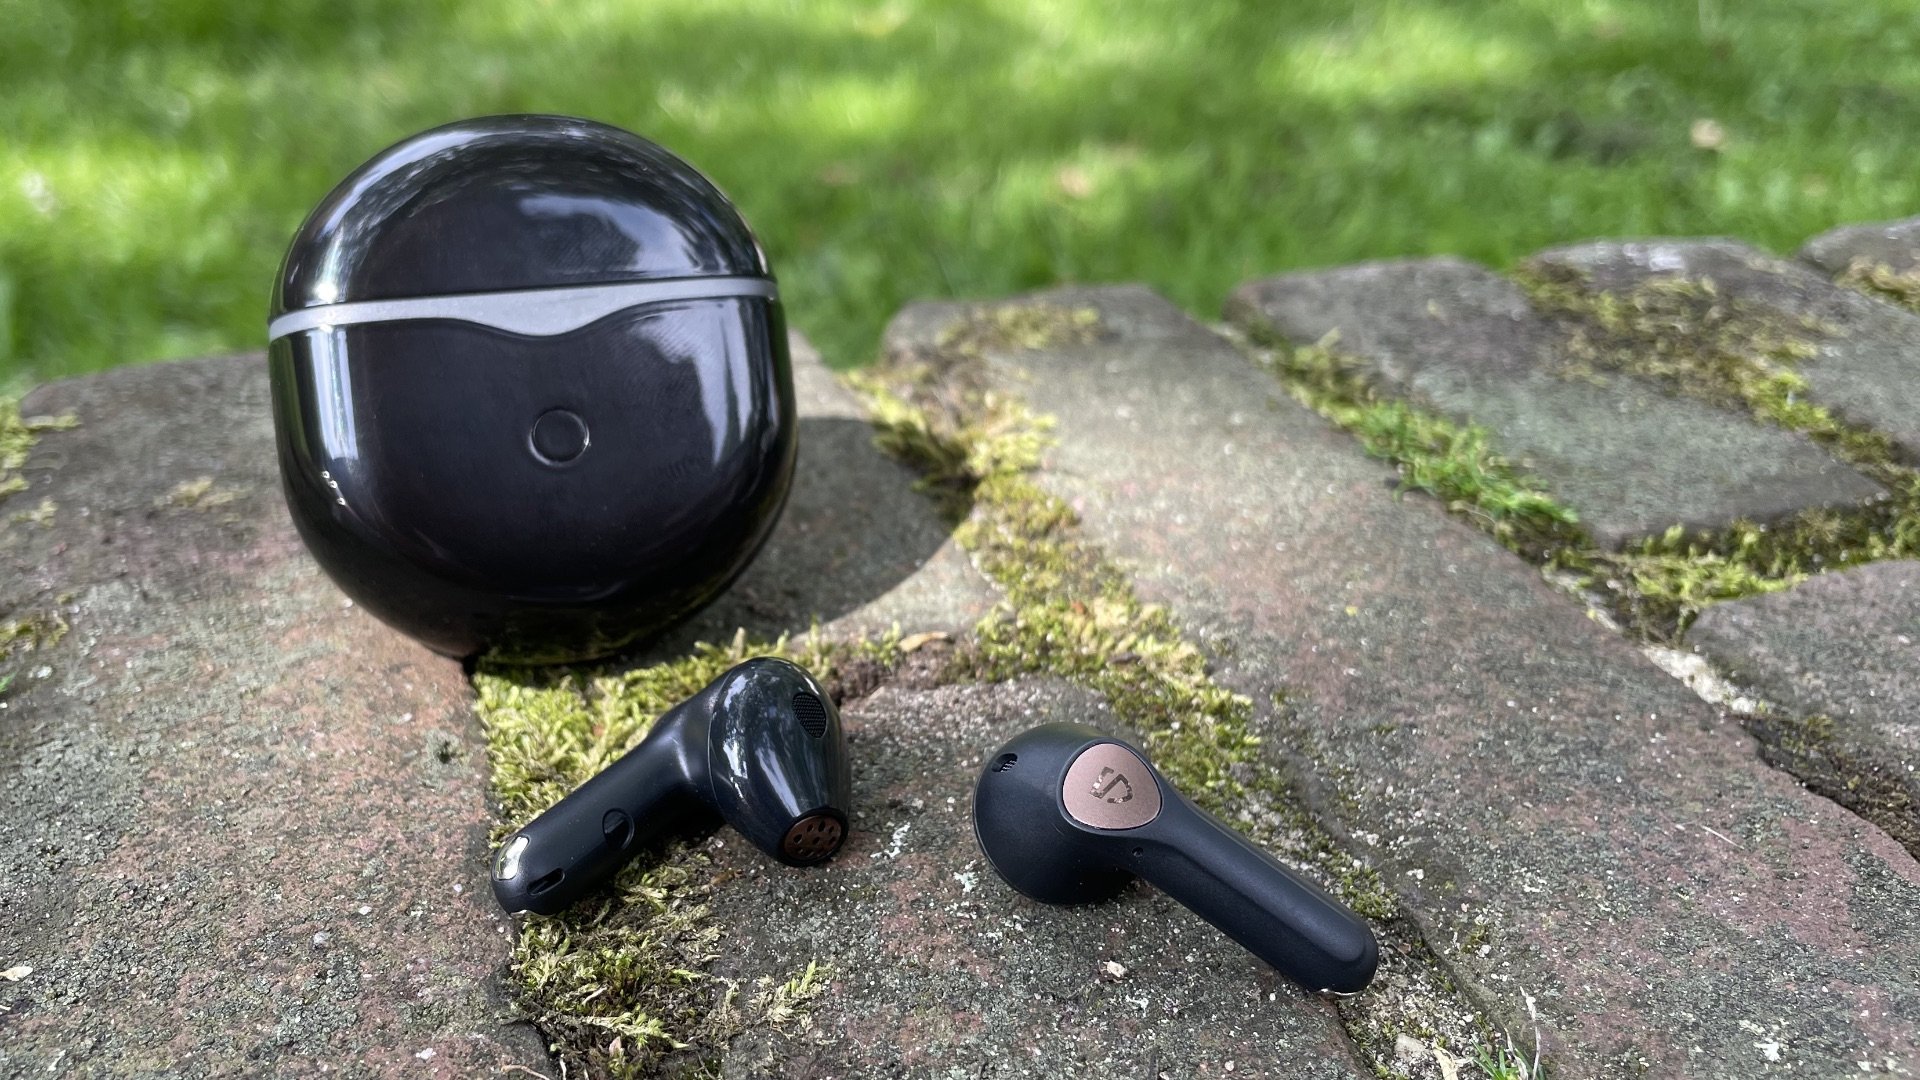 Soundpeats Air4 Review: Affordable AirPods Alternatives That Could Be Better